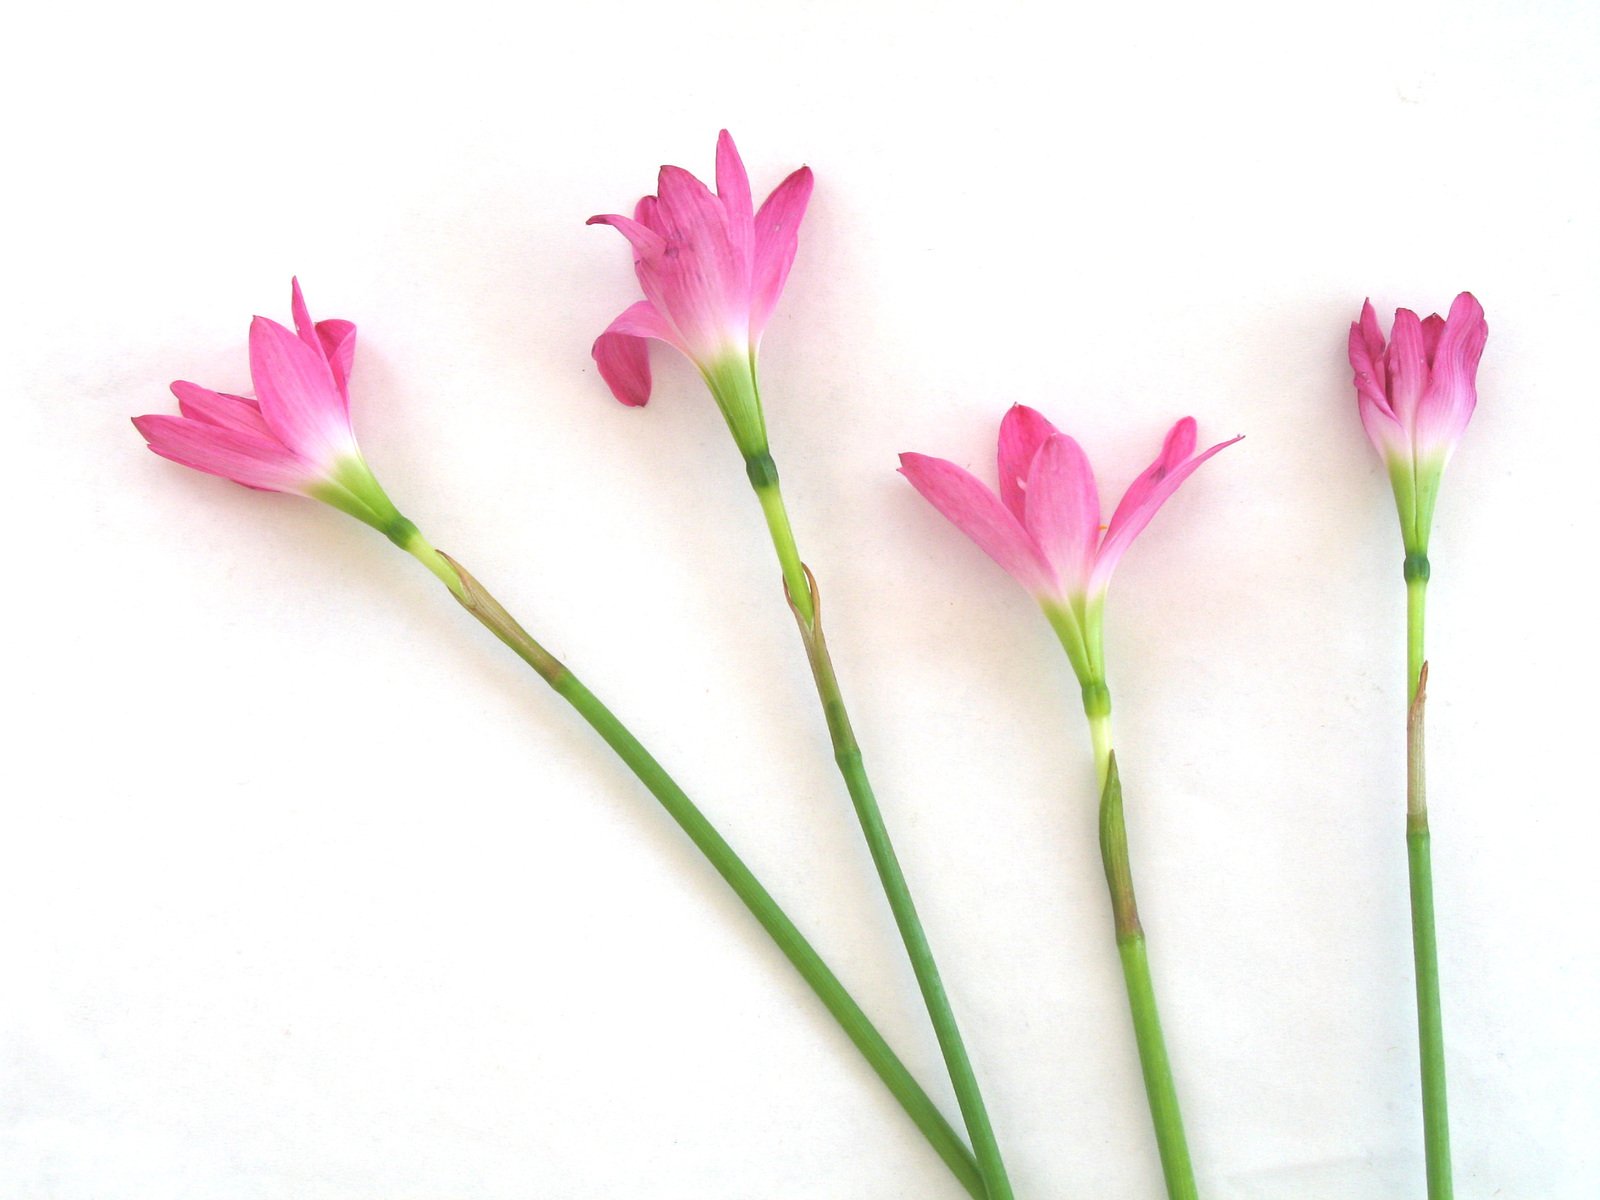 three pink flowers sit next to each other